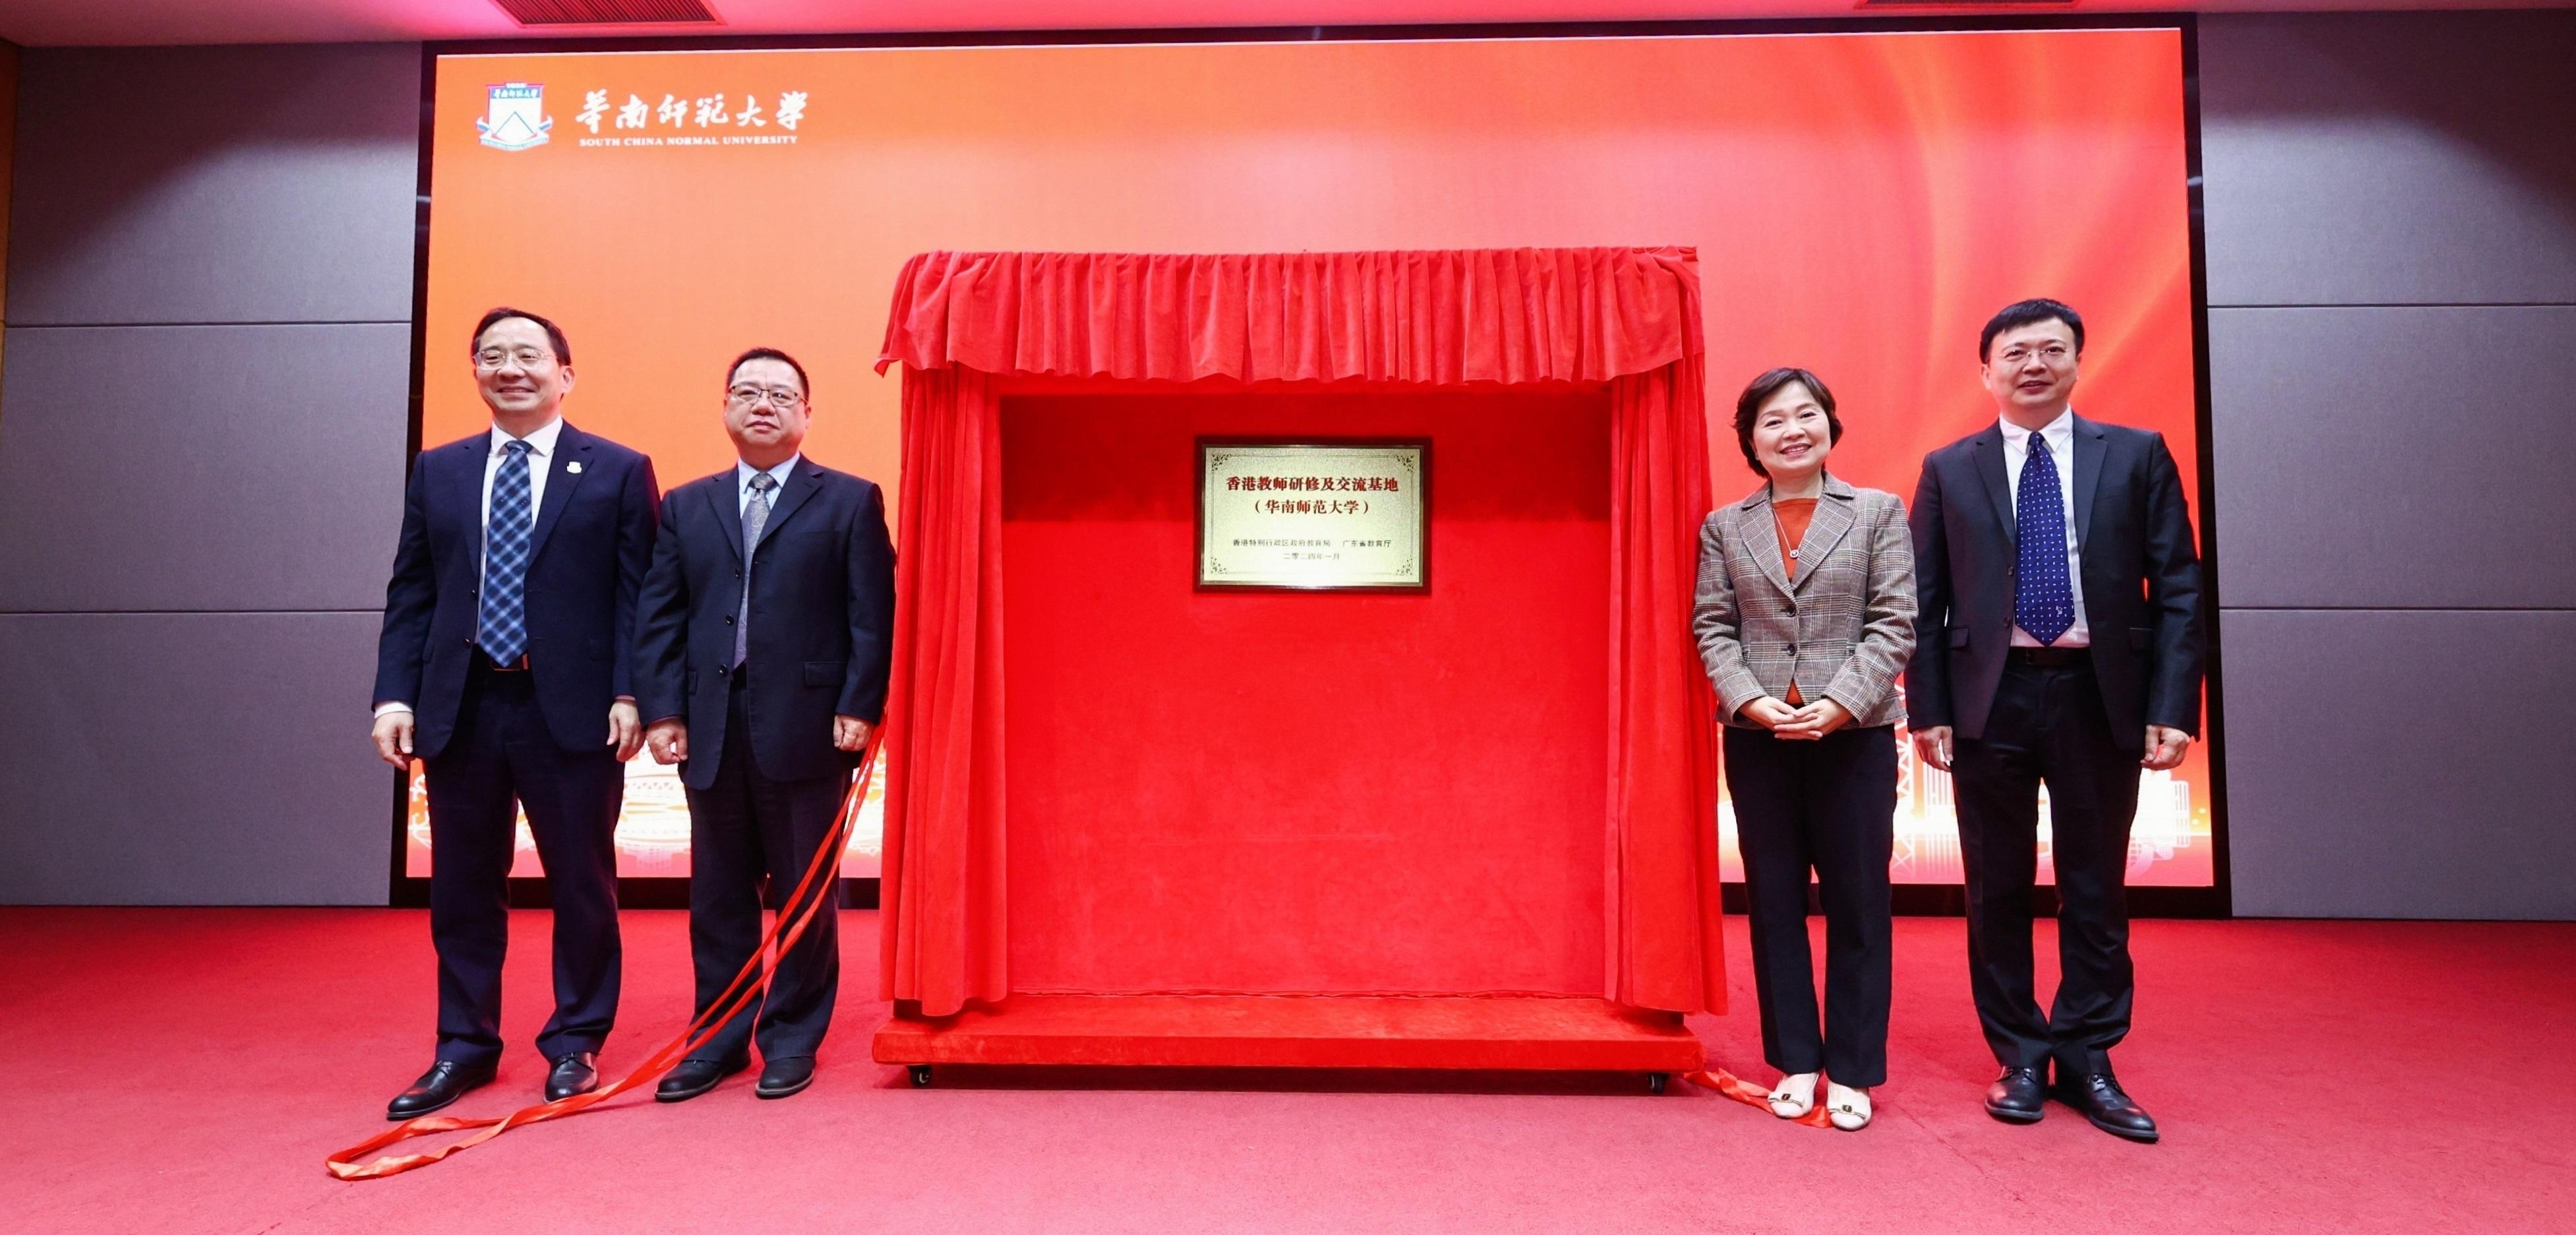 The Secretary for Education, Dr Choi Yuk-lin (second right), today (January 10) attended a plaque-unveiling ceremony of Hong Kong's first teacher training and exchange base at South China Normal University in Guangzhou. Also present were the Director-General of the Department of Education of Guangdong Province, Dr Zhu Kongjun (second left); the Division Director of the Education, Science and Technology Department of the Liaison Office of the Central People's Government in the Hong Kong Special Administrative Region, Mr He Jinhui (first right); and the Secretary of the Communist Party of China at South China Normal University Committee, Dr Wang Binwei (first left). 